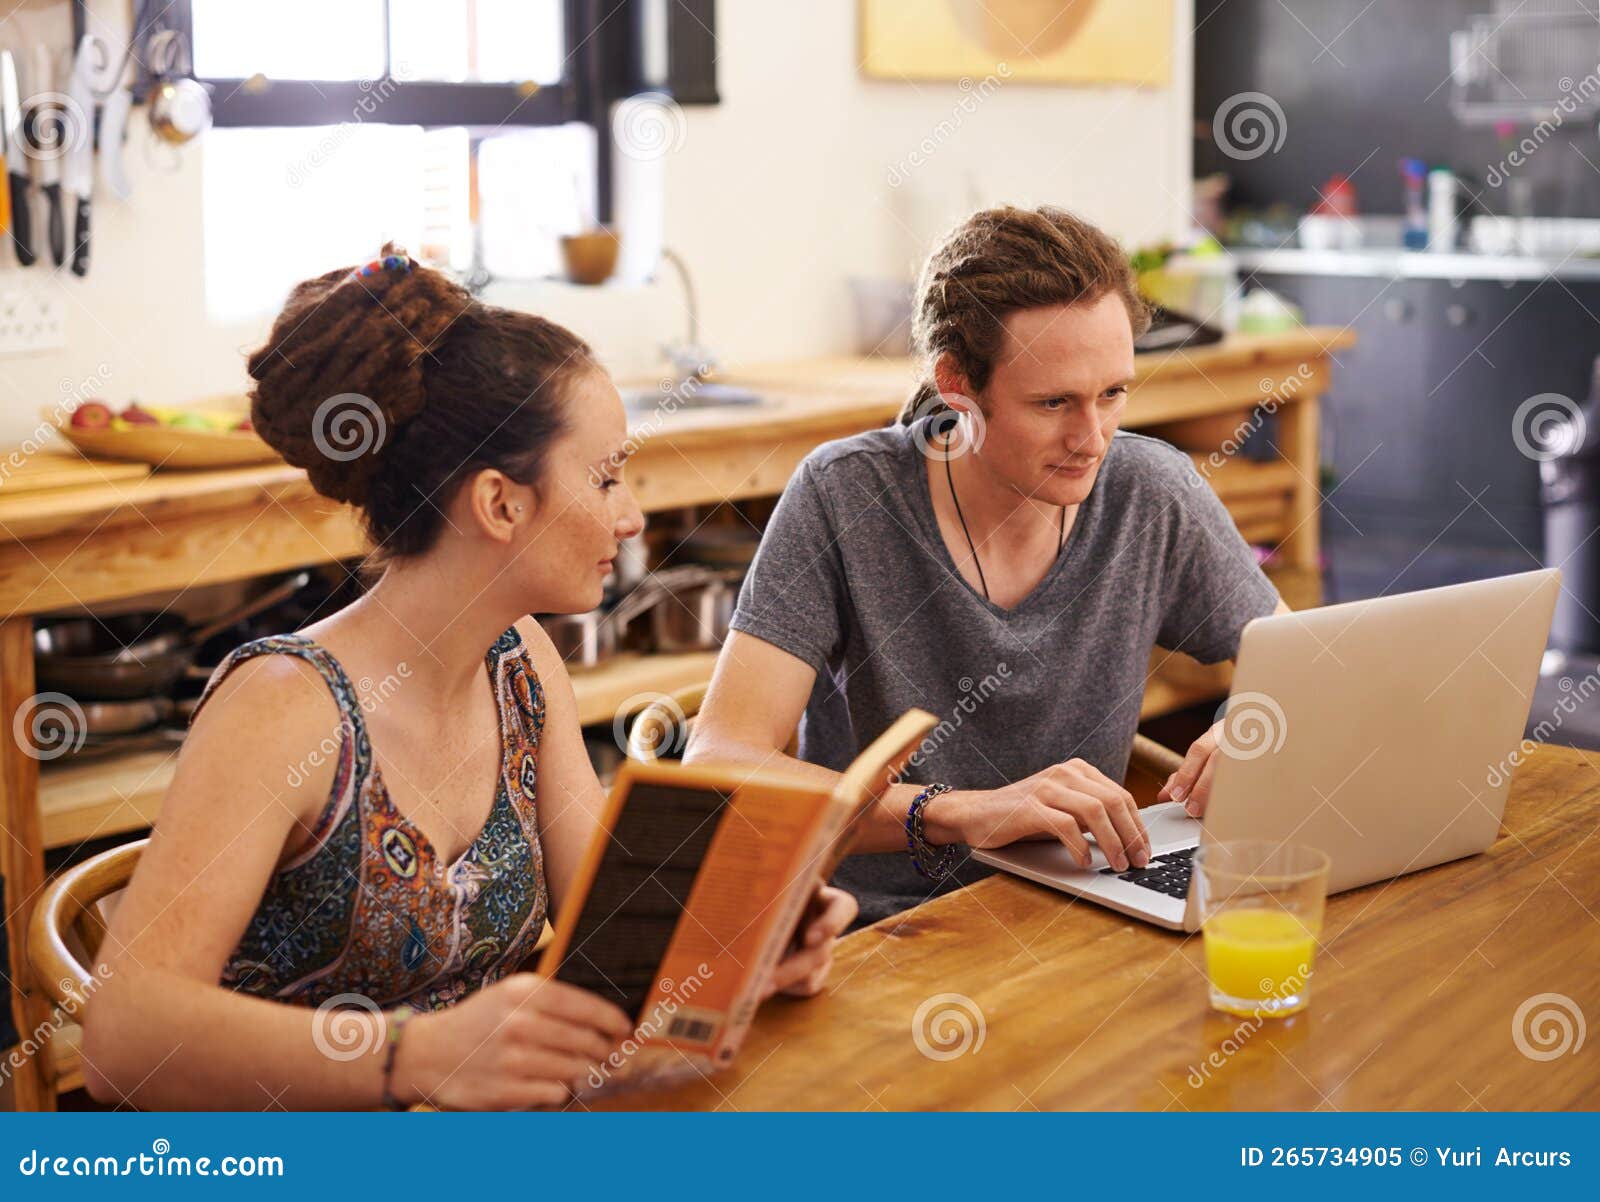 internet trumps book every time. a happy couple with dreadlocks sitting at a table using a laptop and reading a book.